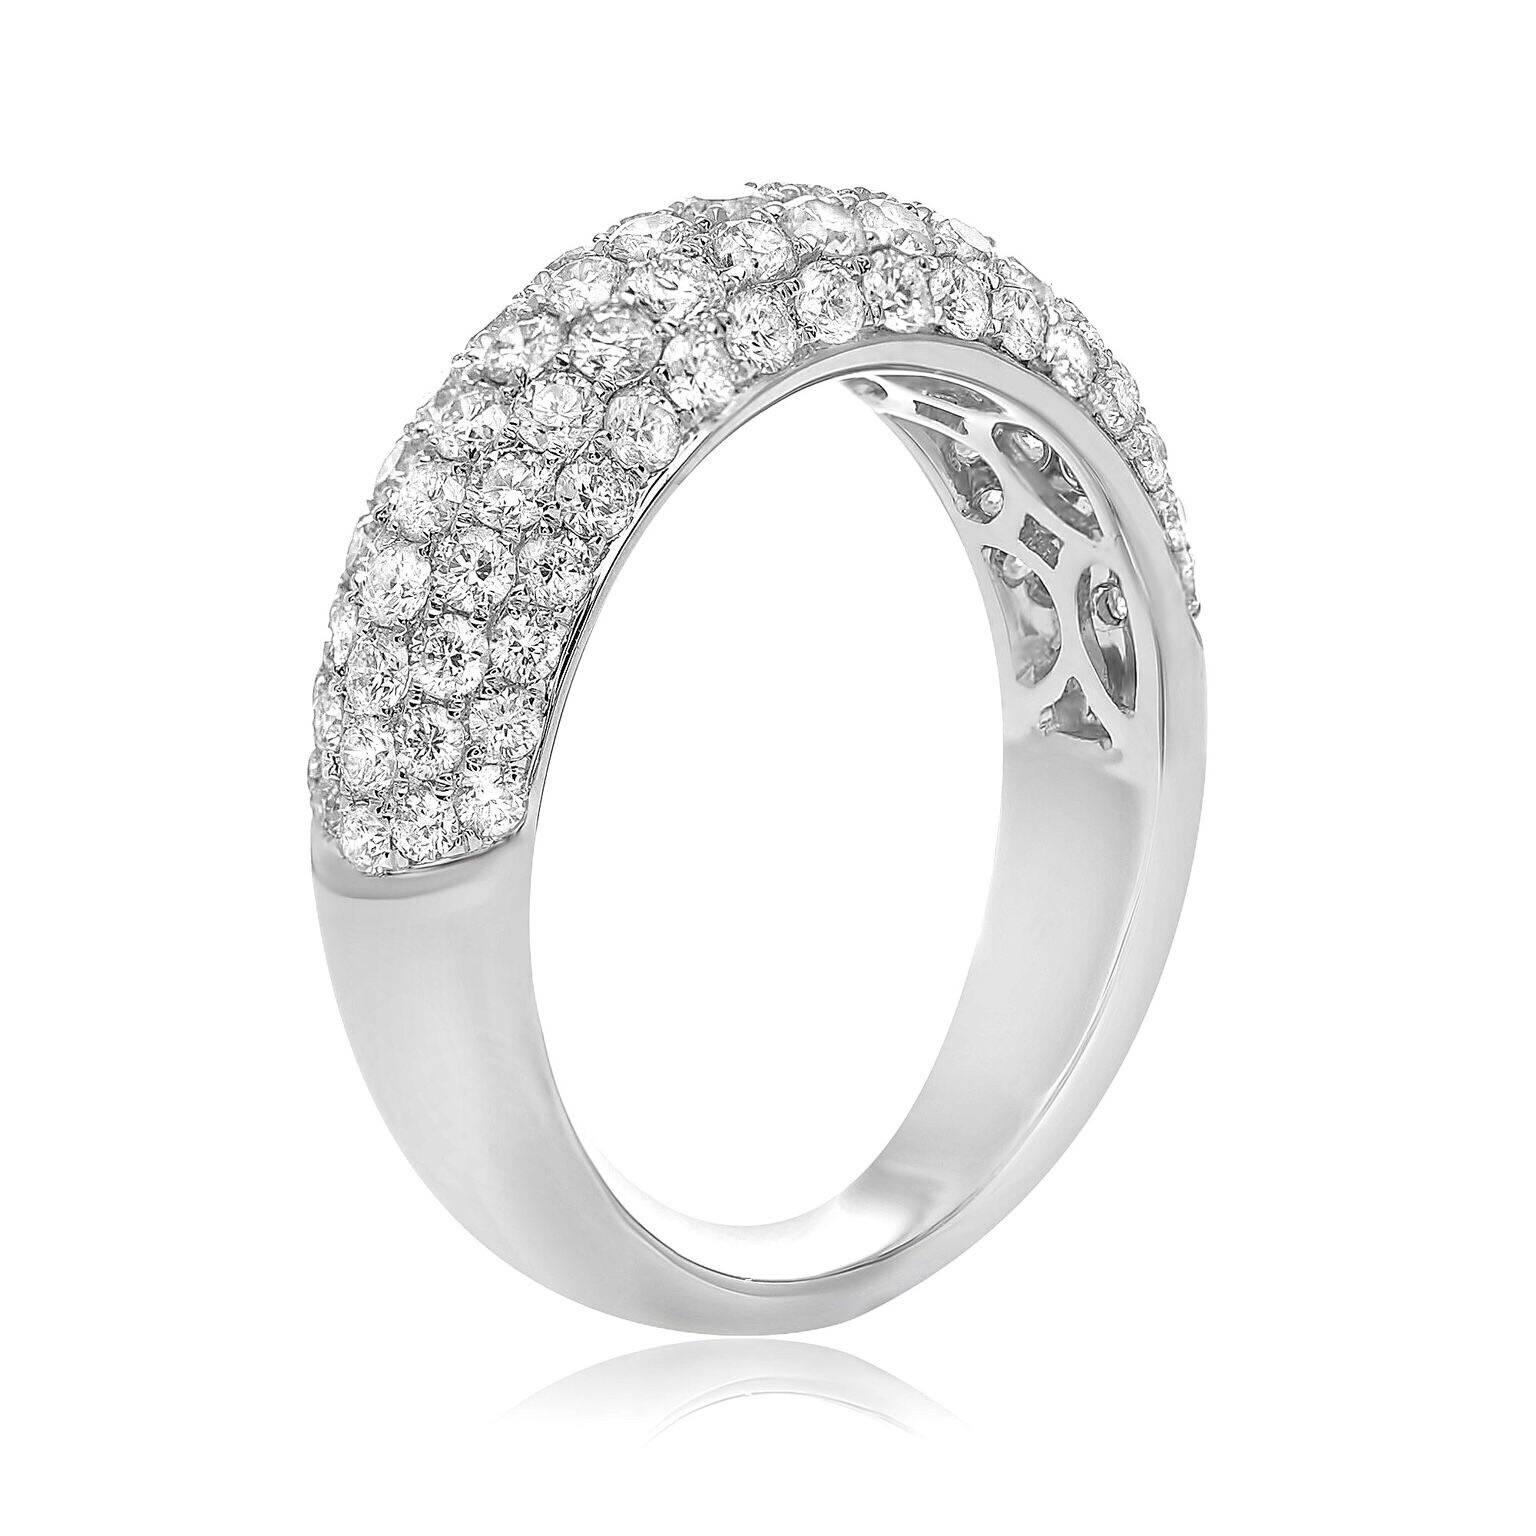 Five rows of pave diamonds set in 14k white gold. This gift makes a wonderful anniversary gift, push present, or birthday gift. Diamond is the birthstone for April babies. This ring makes a perfect birthstone present. In ancient times the diamond